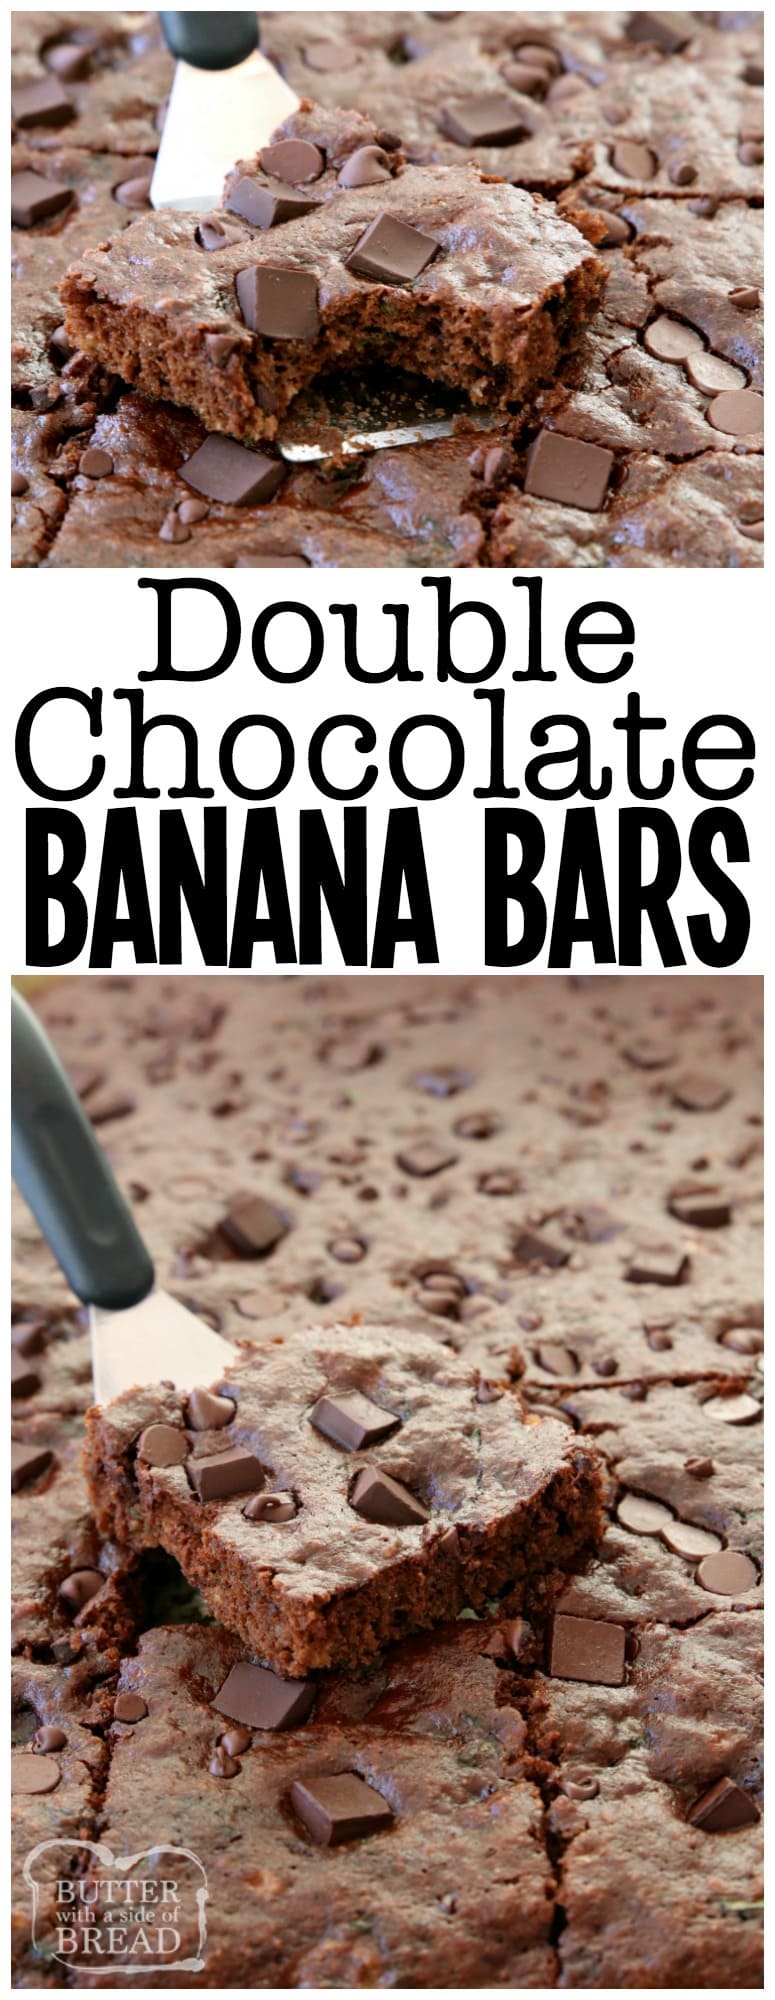 Double Chocolate Banana Bars made with 5 bananas & double the chocolate for a tasty banana recipe that everyone enjoys. Not too sweet & perfect anytime! Double #Chocolate #Banana Bars #snack #dessert #recipe #skinny Butter With A Side of Bread